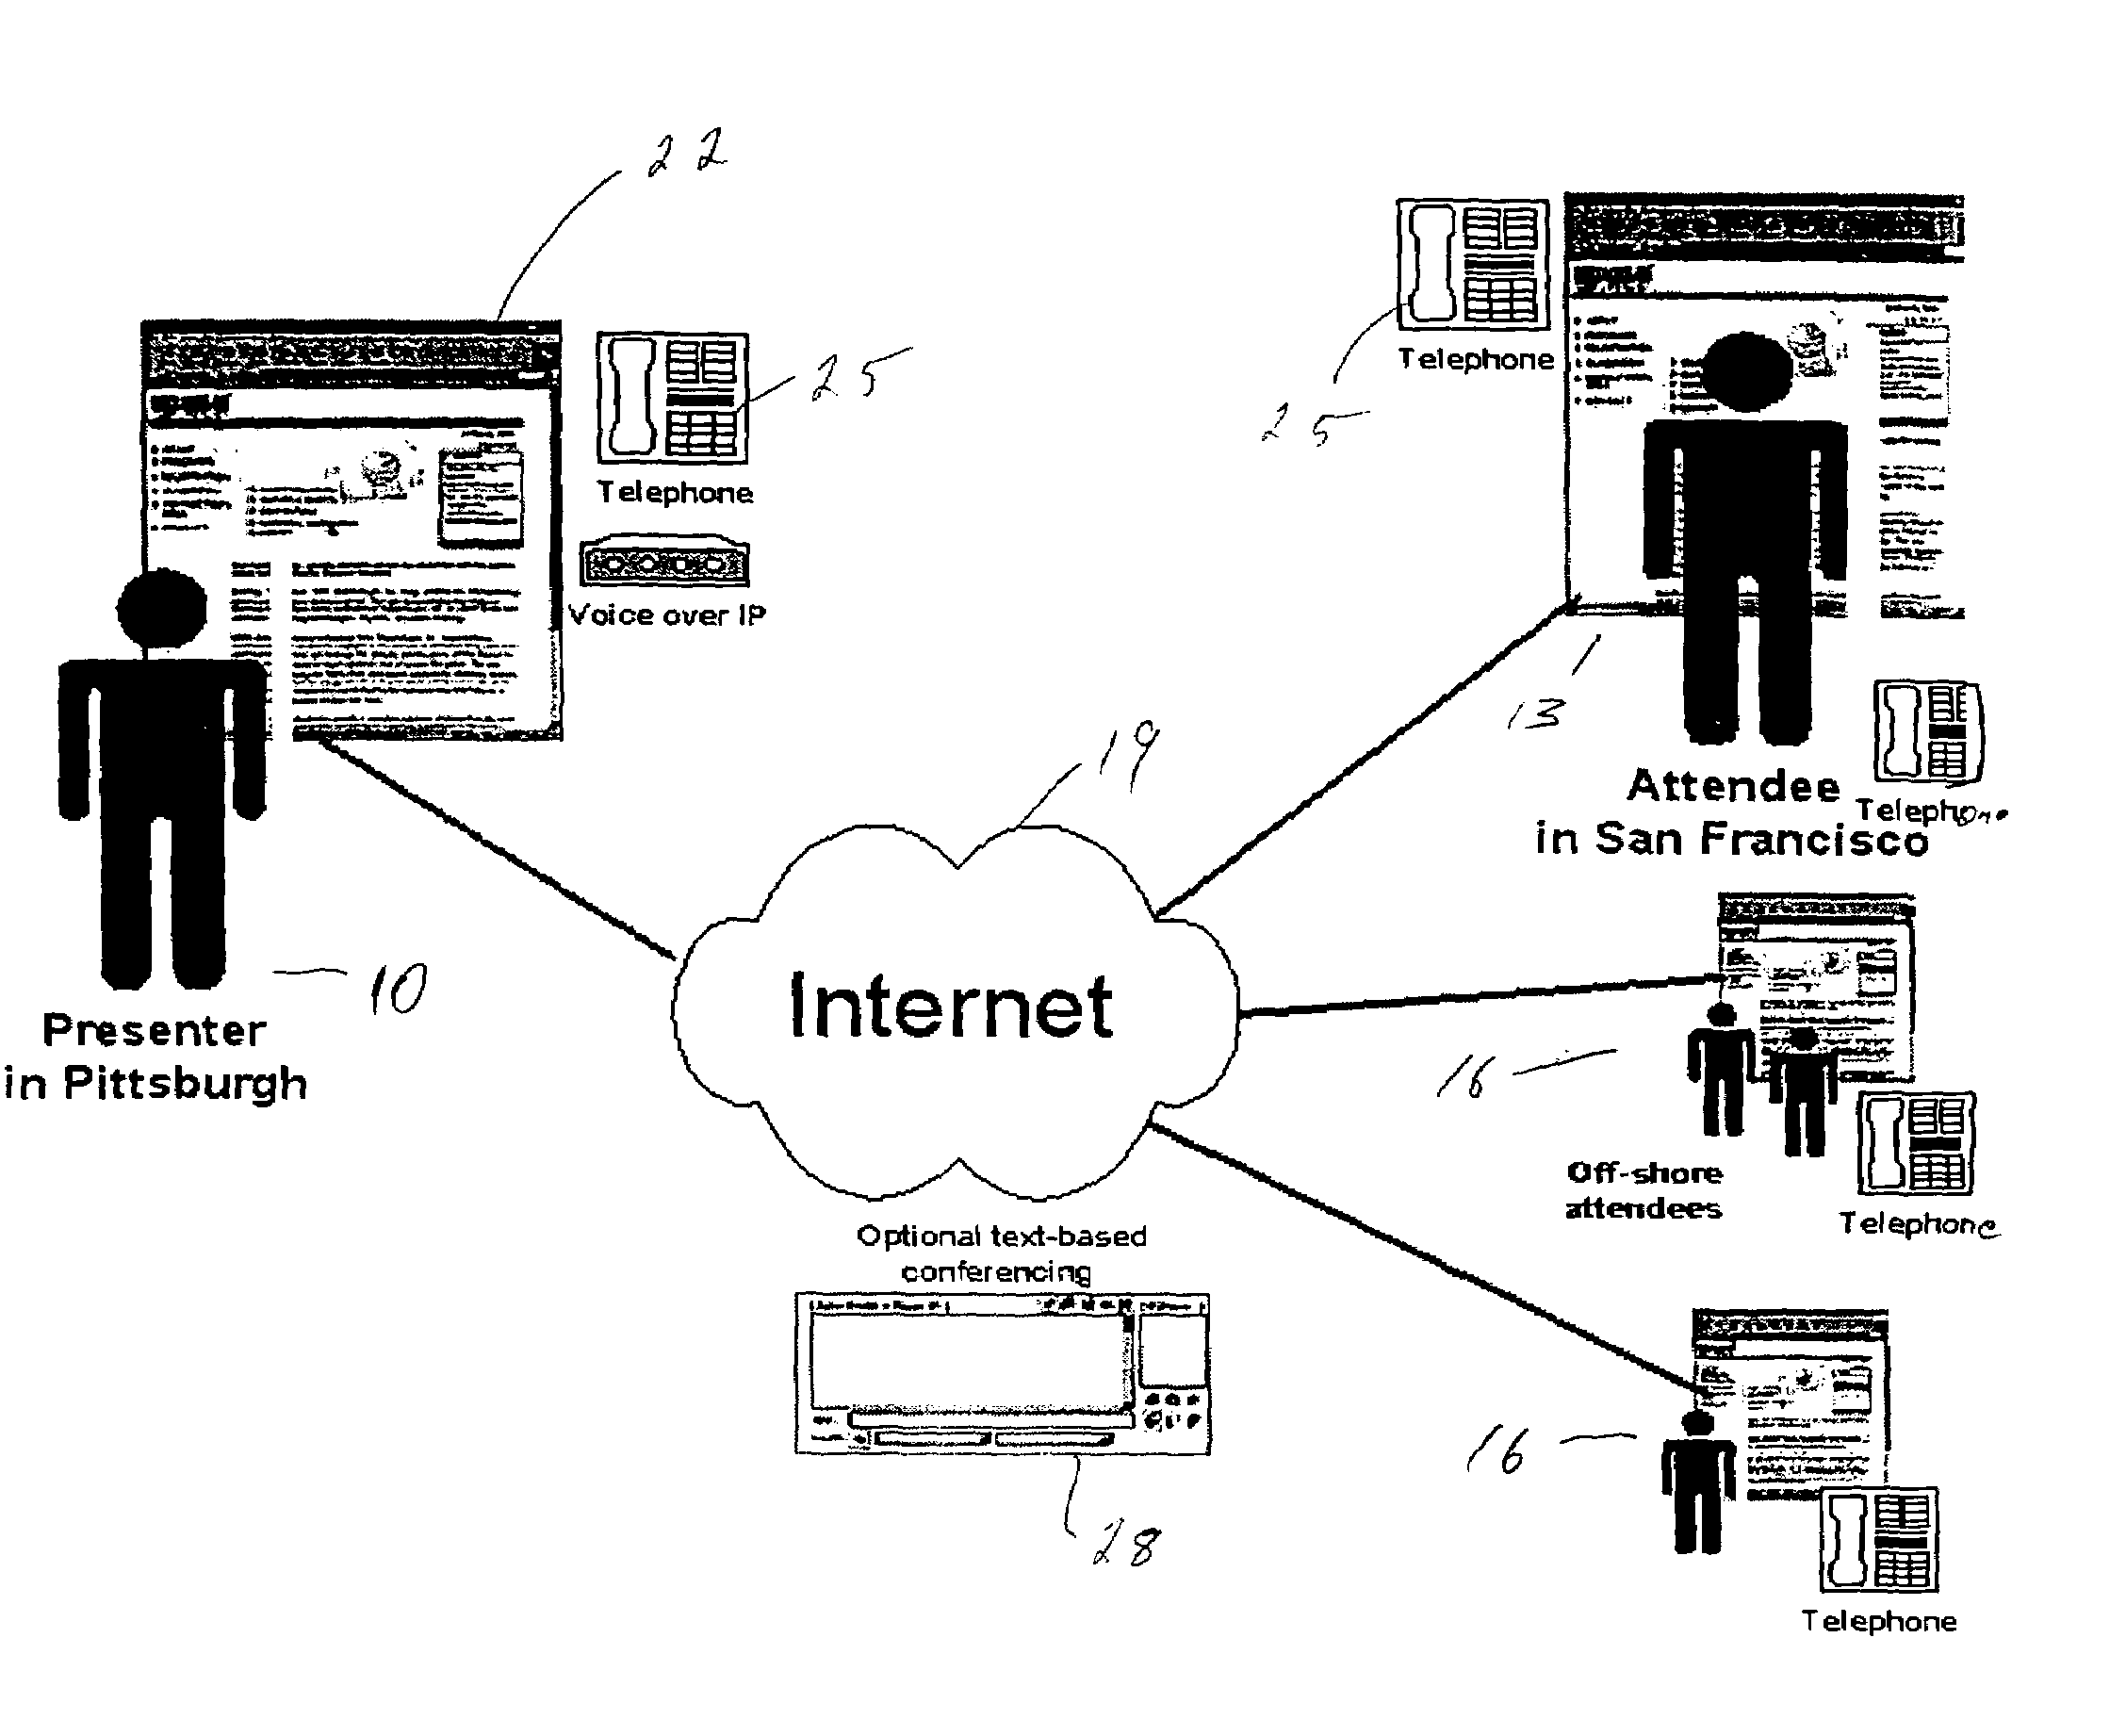 Shared web browser apparatus and method for interactive communications